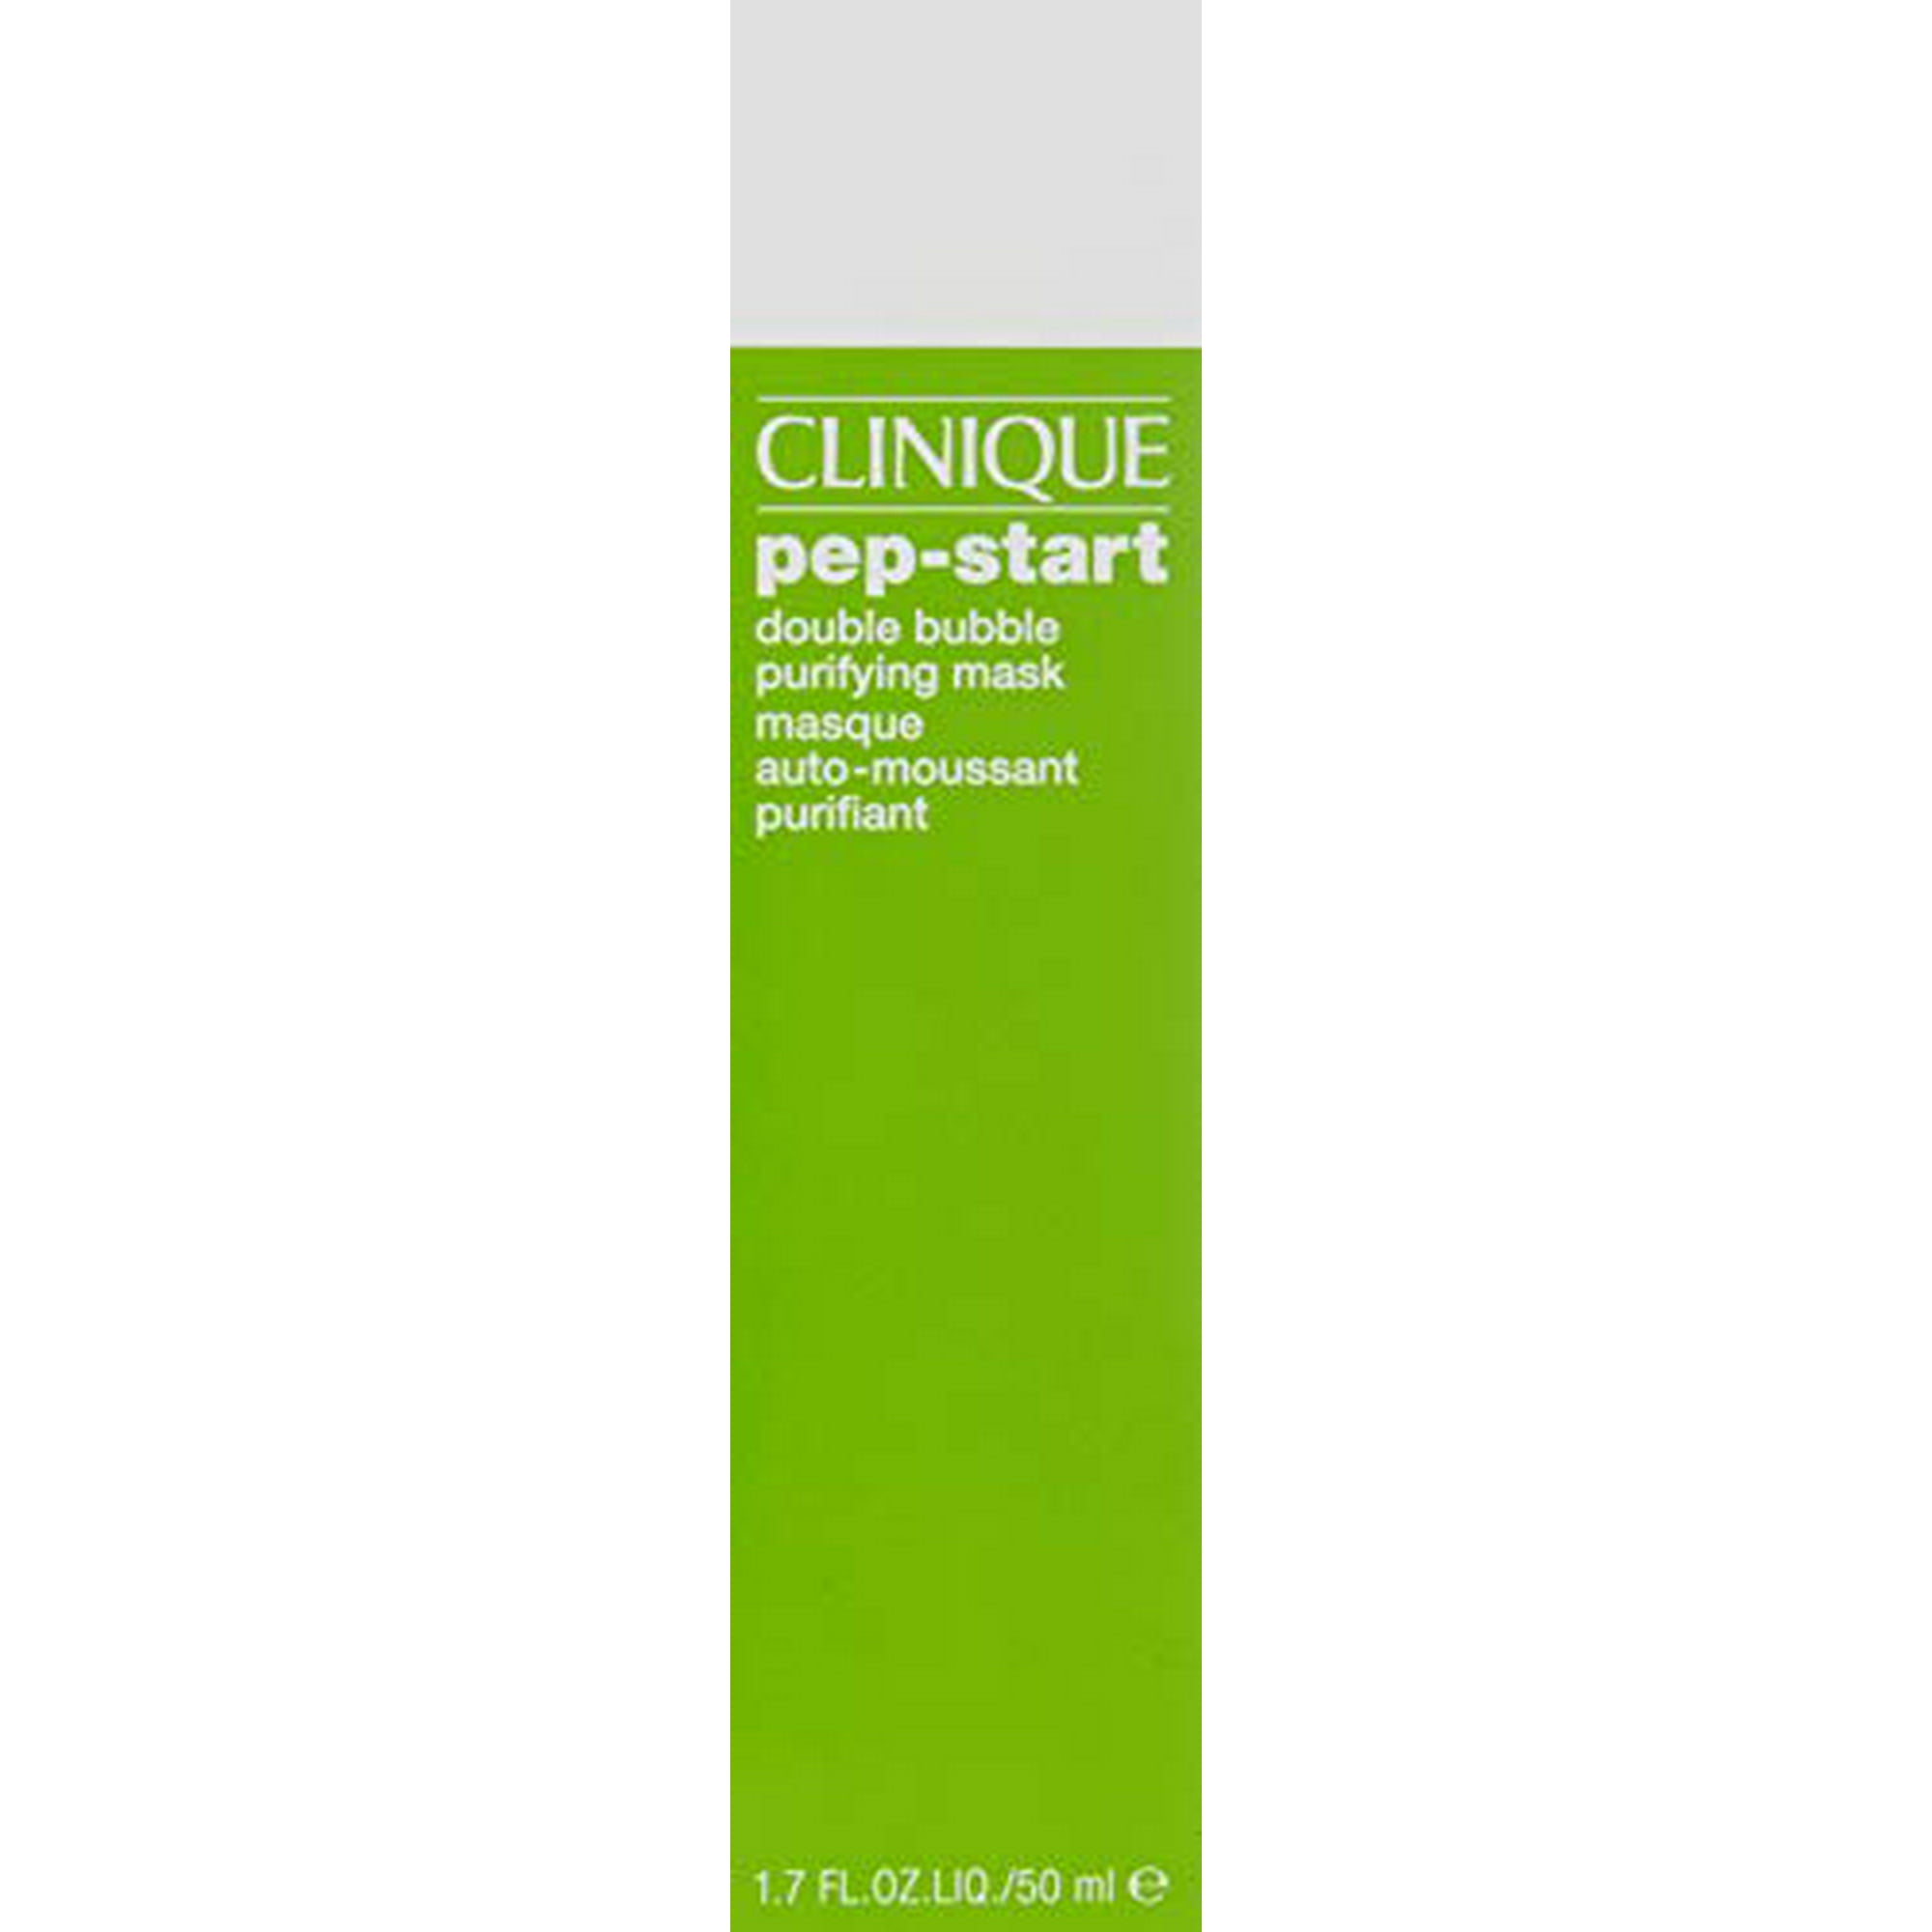 Double Bubble Purifying Mask by Clinique for Unisex - 1.7 oz Mask | Walmart